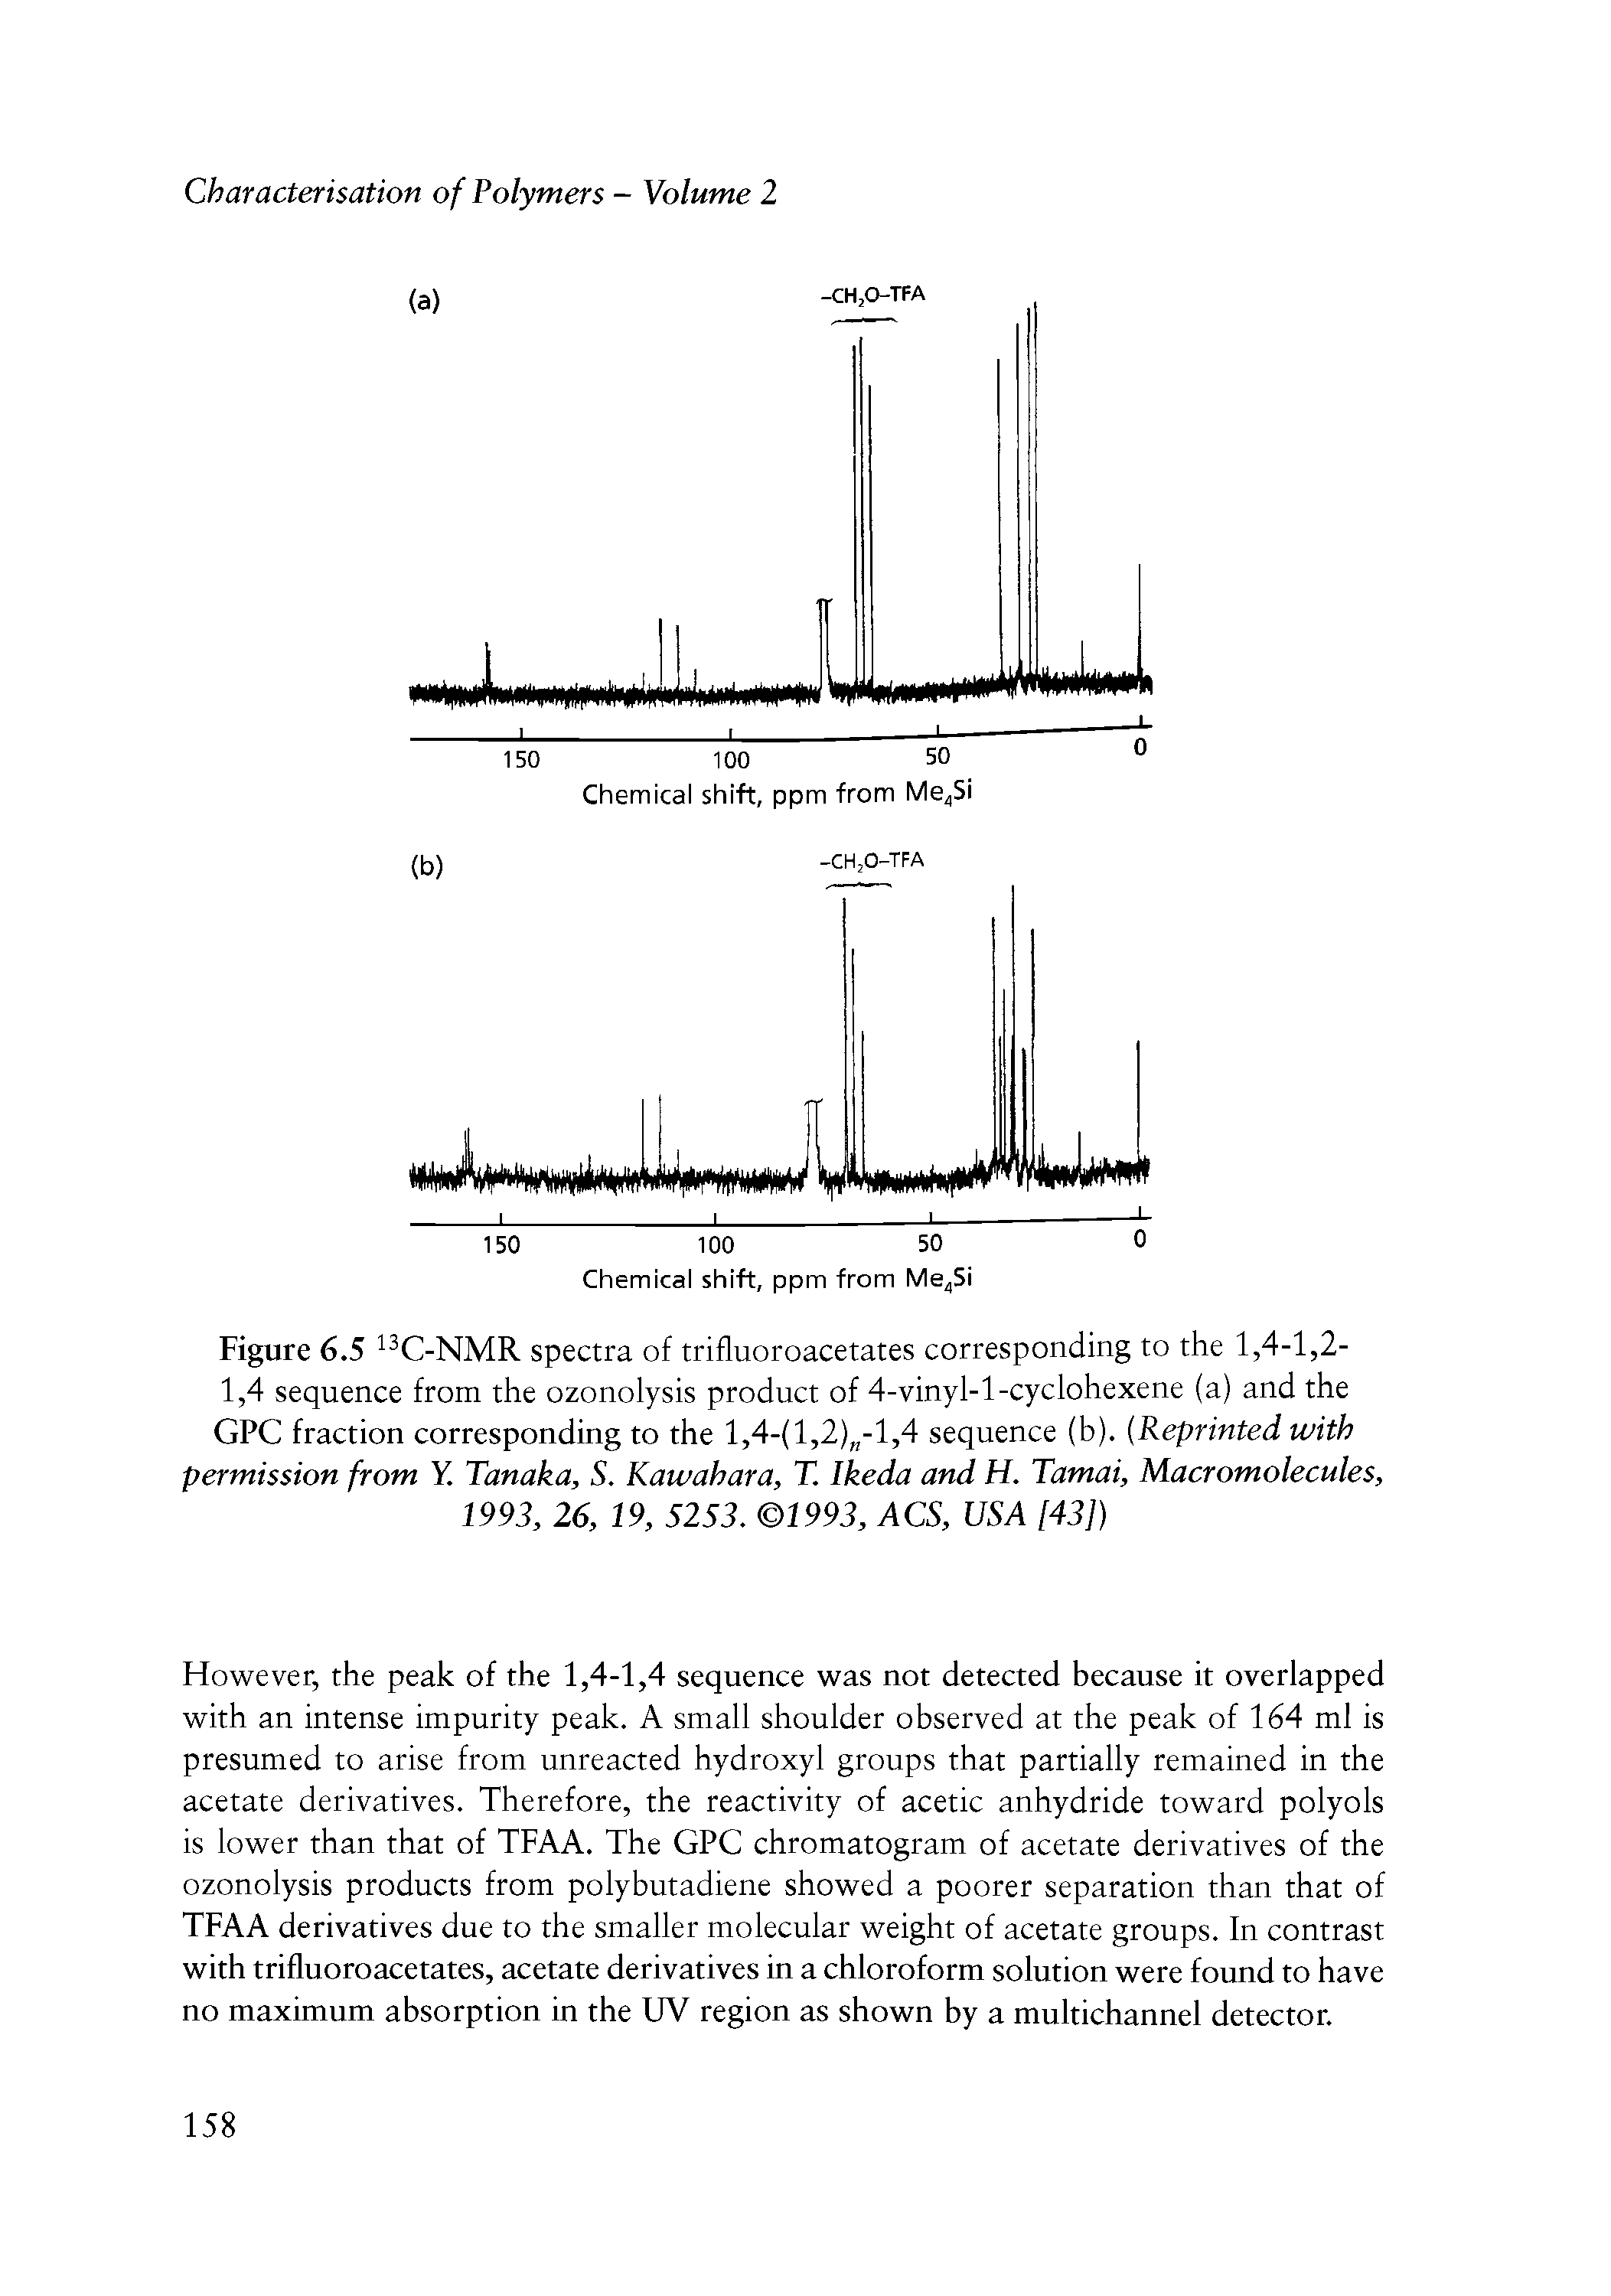 Figure 6.5 C-NMR spectra of trifluoroacetates corresponding to the 1,4-1,2-1,4 sequence from the ozonolysis product of 4-vinyl-l-cyclohexene (a) and the GPC fraction corresponding to the 1,4-(1,2) -1,4 sequence (h). Reprinted with permission from Y. Tanaka, S. Kawahara, T. Ikeda and H. Tamai, Macromolecules, 1993, 26, 19, 5253. 1993, ACS, USA [43])...